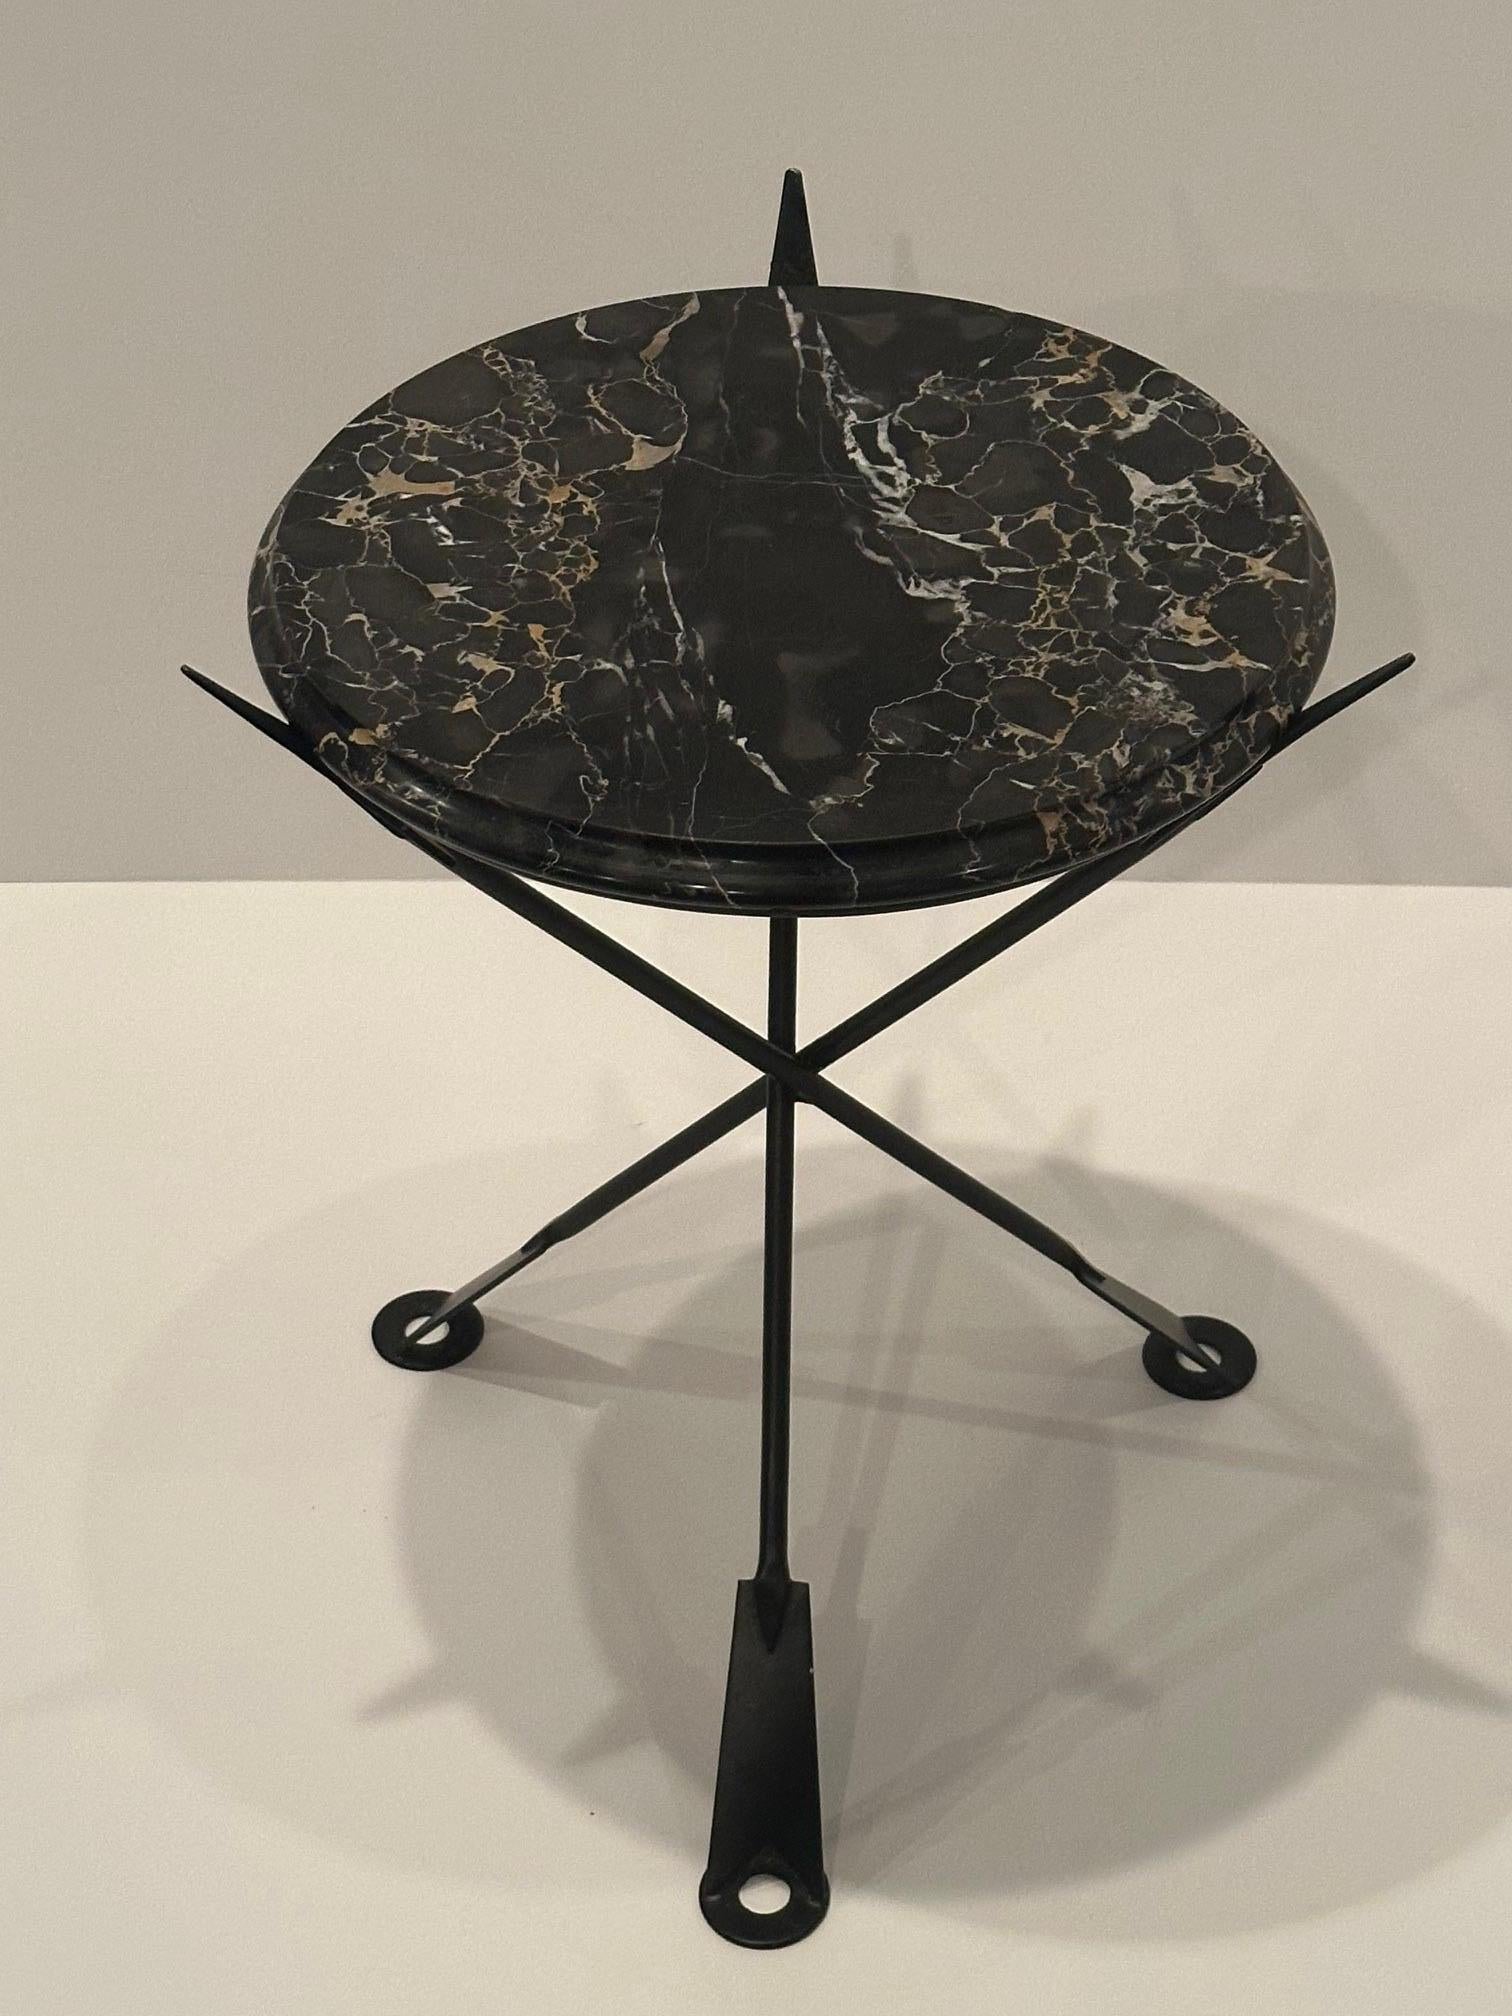 Glamorous round arrow motif painted iron side table with black and white marble top.
16